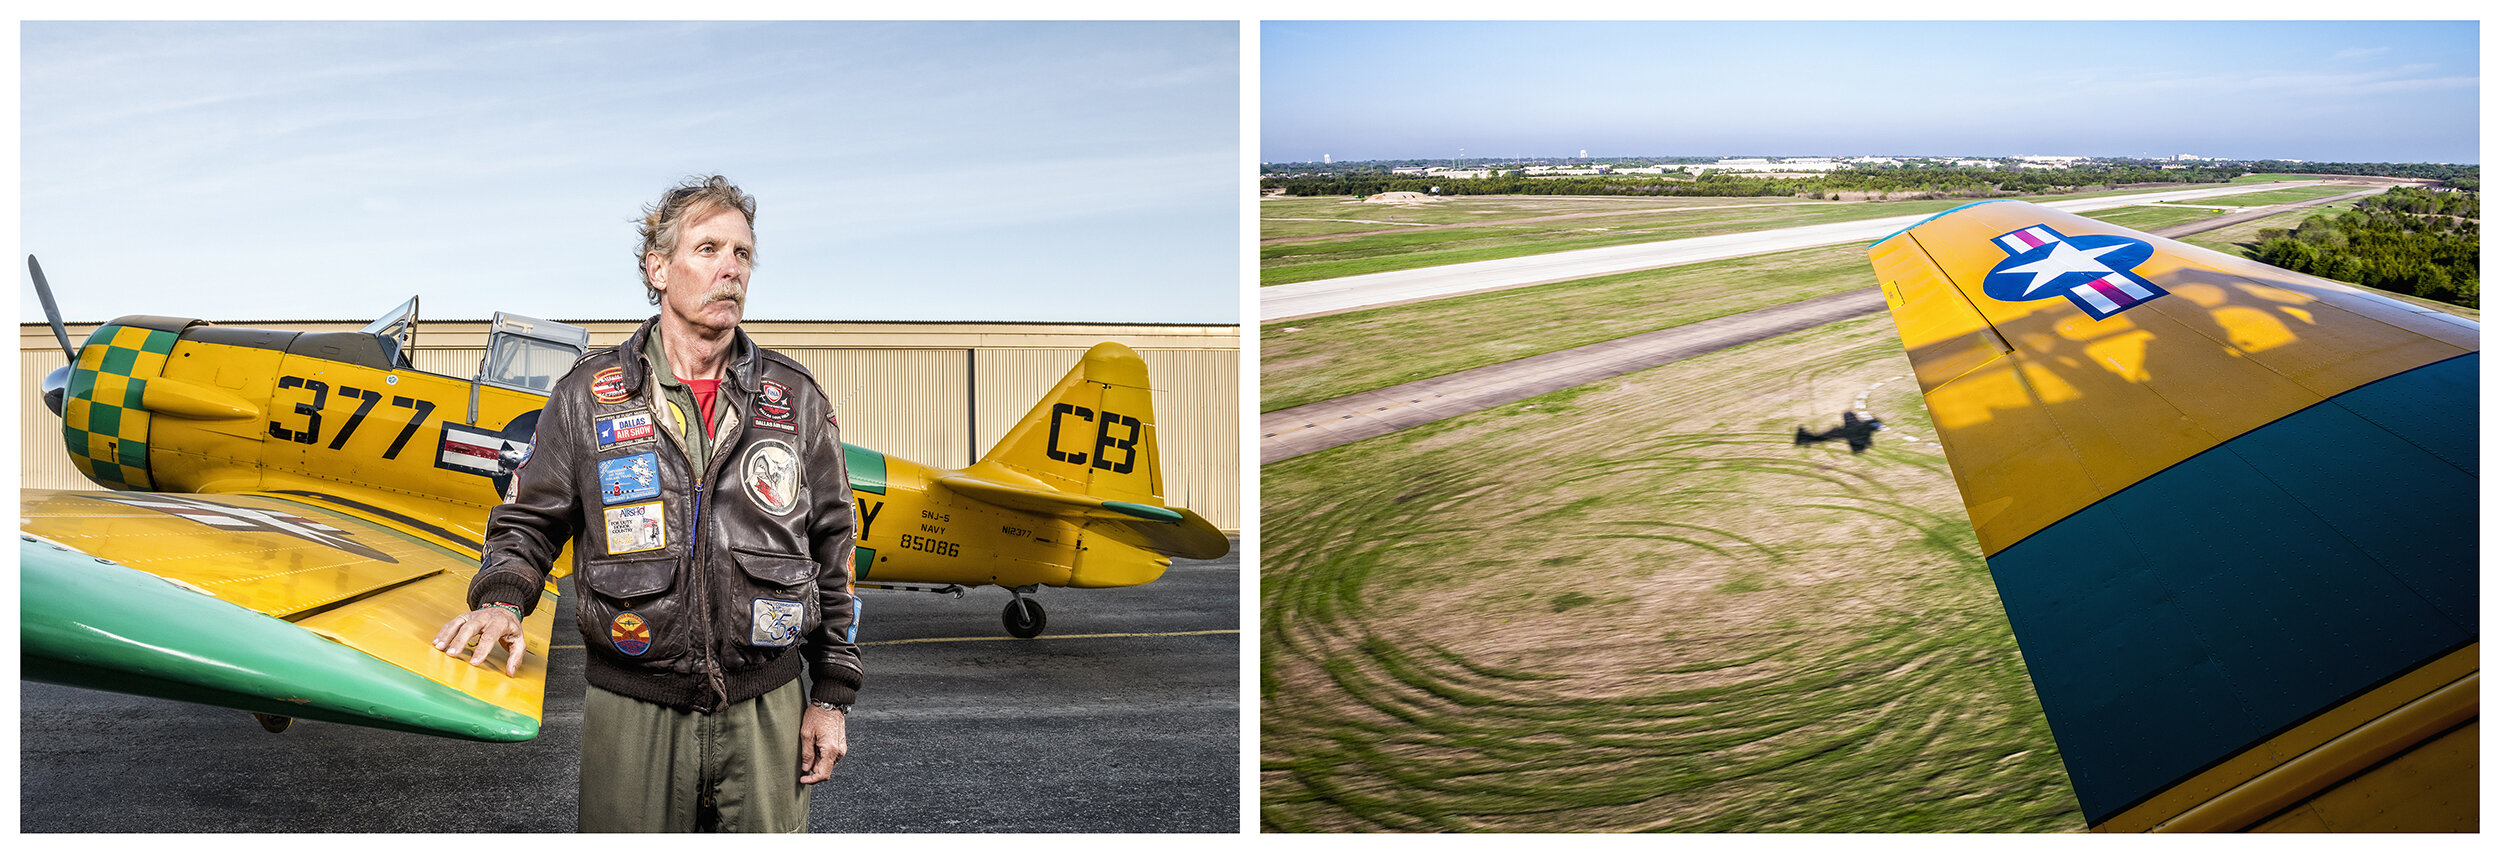  Steve DeWolf pilots his T-6 Texan at Dallas Executive Airport in Dallas, TX.  DeWolf attended the U.S. Naval Academy with hopes of flying carrier-based aircraft, but imperfect eyesight ended his dream.  He instead practiced law, travelled extensivel